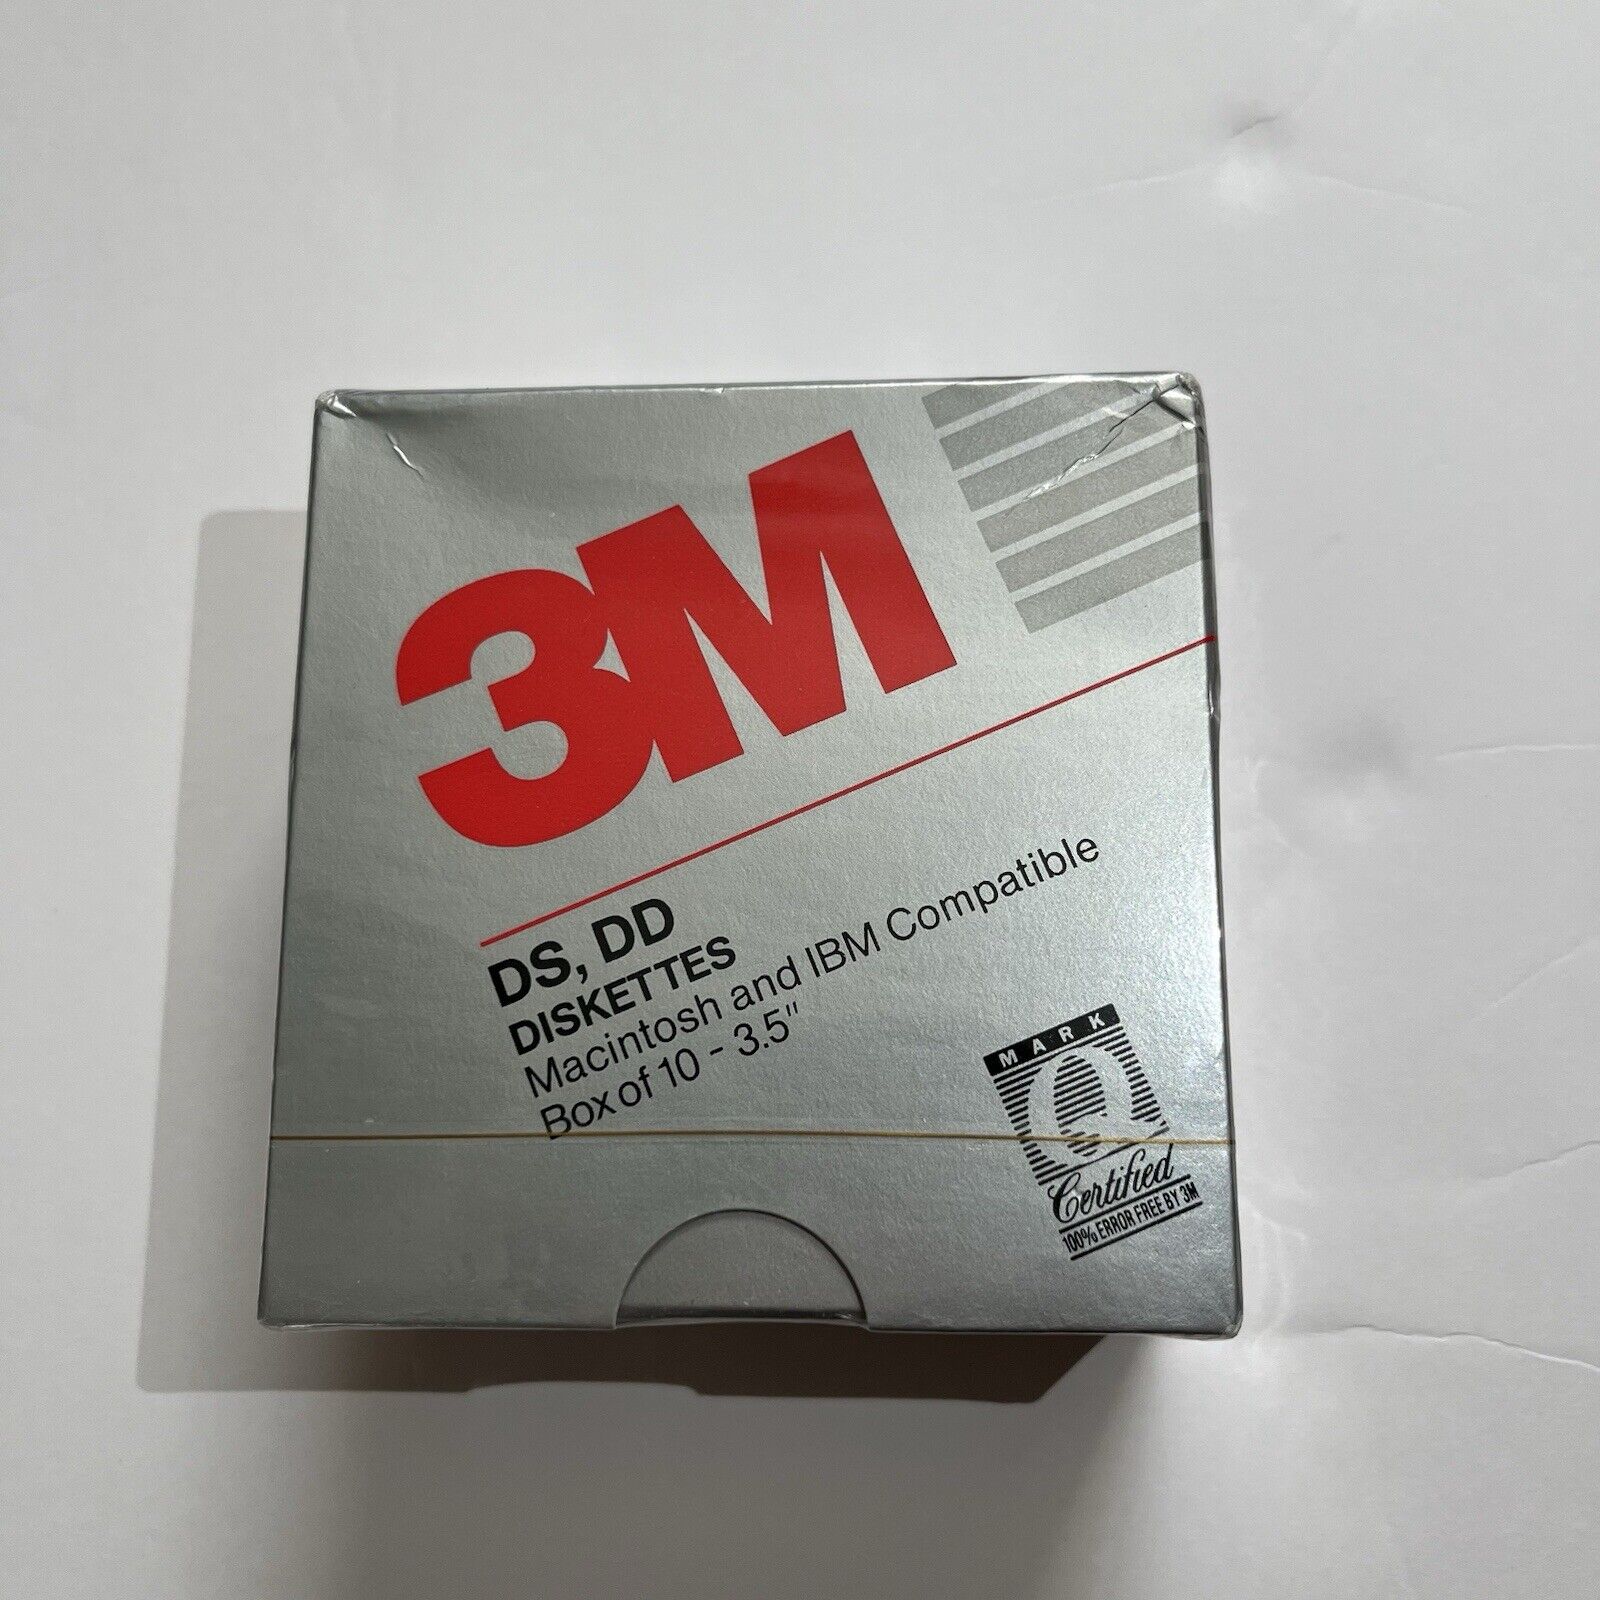 3M DS/DD Diskettes “floppy Disc” Macintosh And IBM compatible Box Of 10 - 3.5”